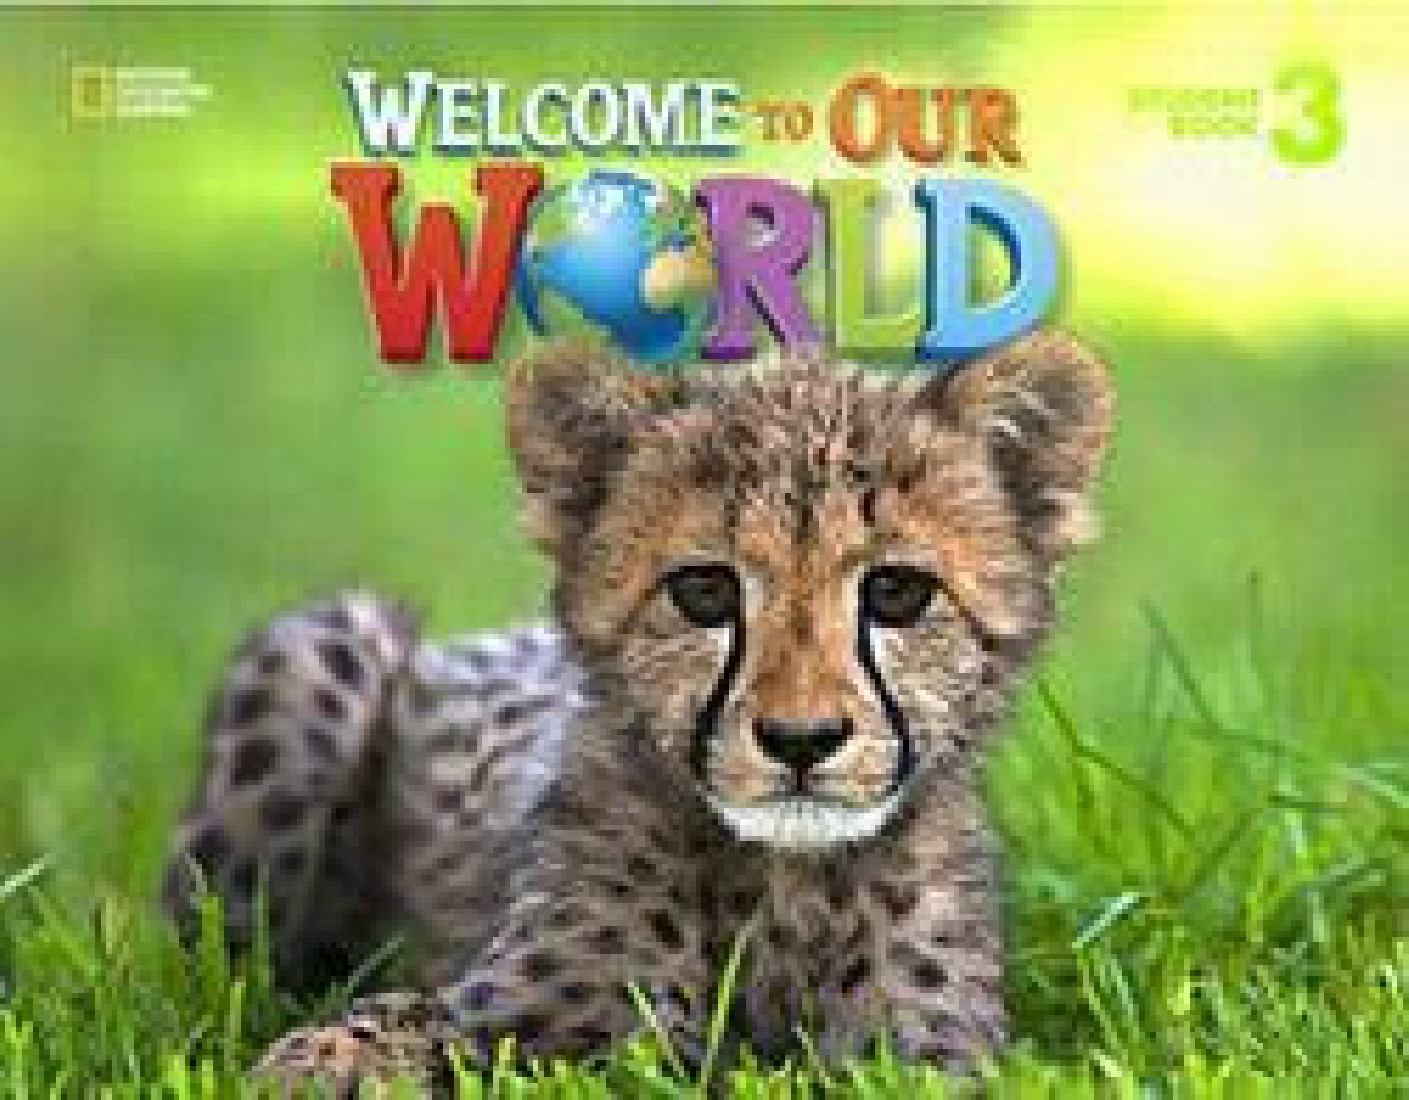 WELCOME TO OUR WORLD 3 SB AMER. ED.